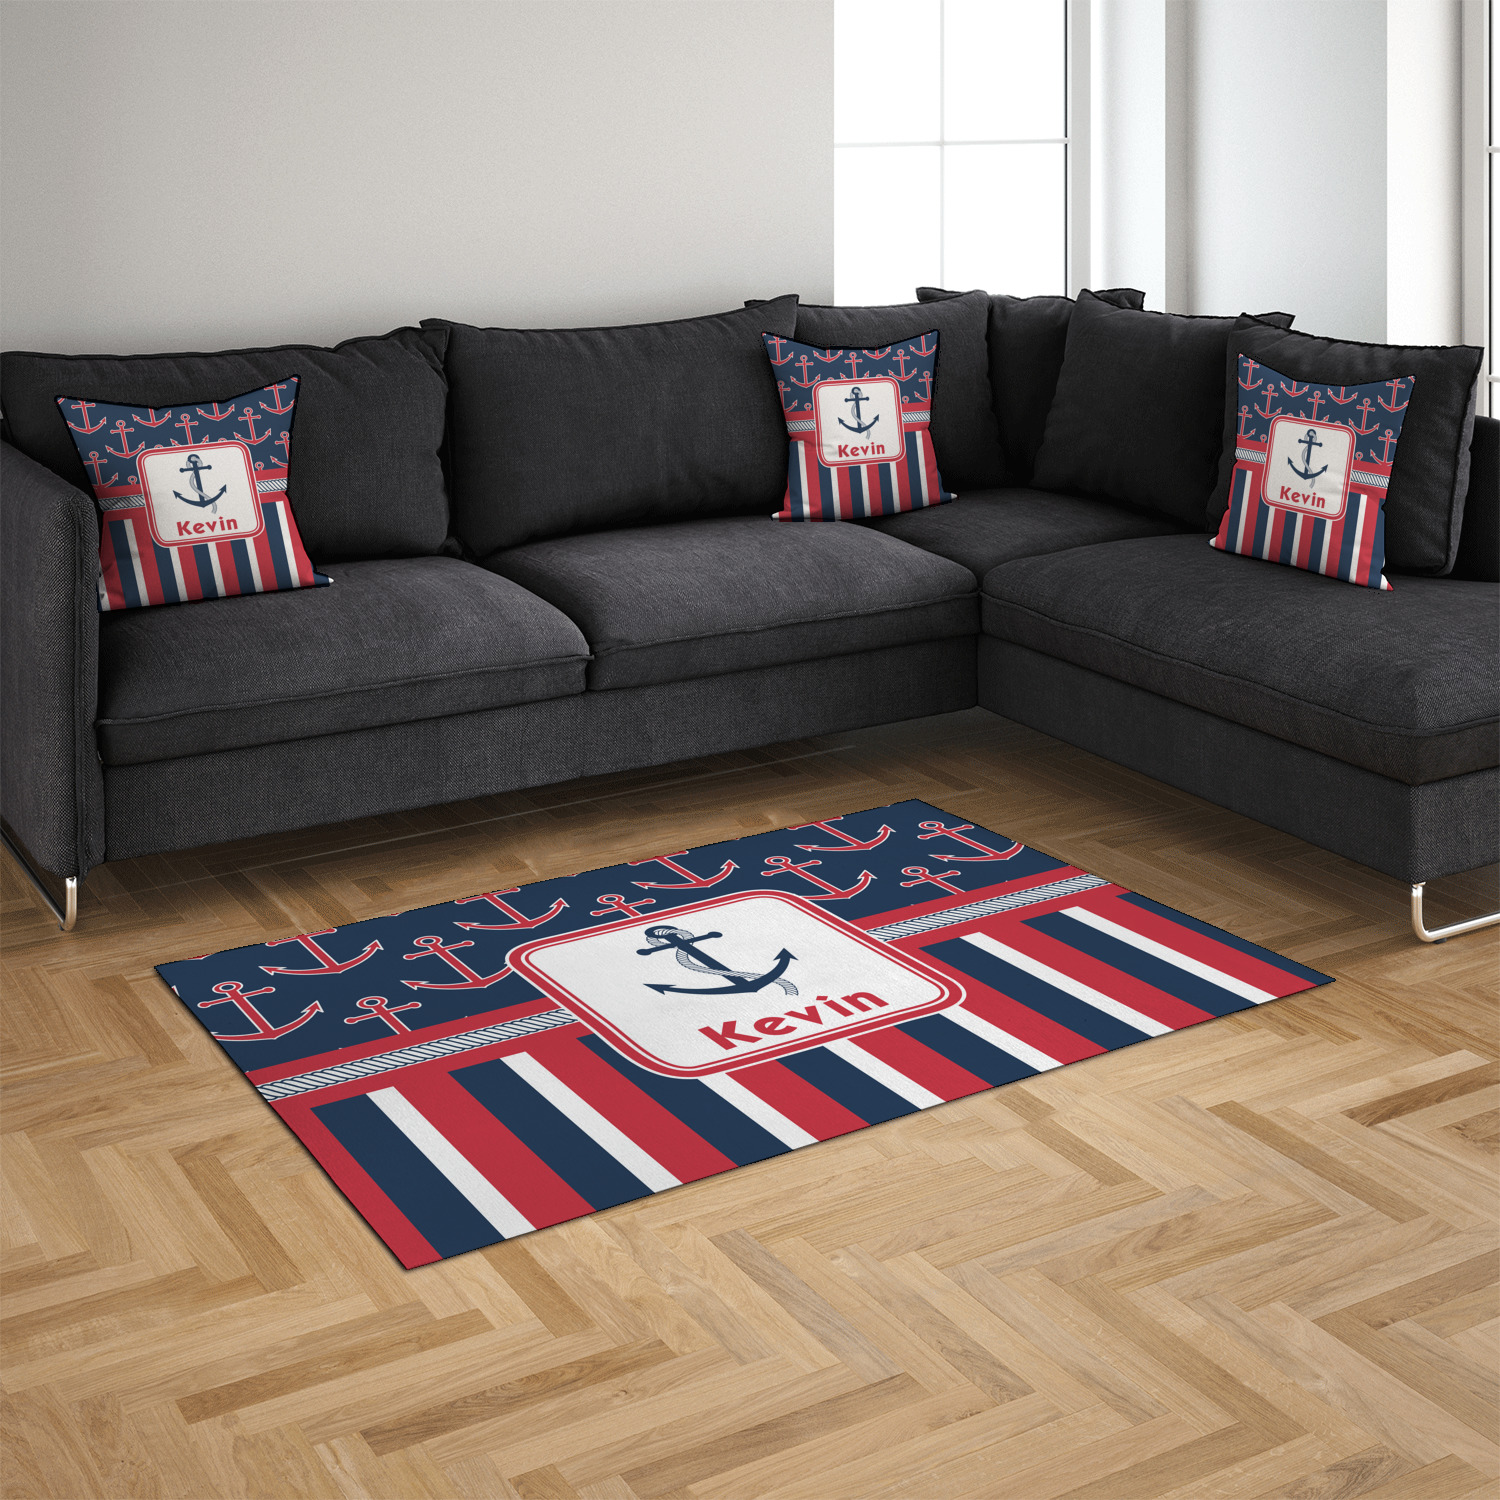 https://www.youcustomizeit.com/common/MAKE/190463/Nautical-Anchors-Stripes-4-x6-Indoor-Area-Rugs-IN-CONTEXT.jpg?lm=1645745888